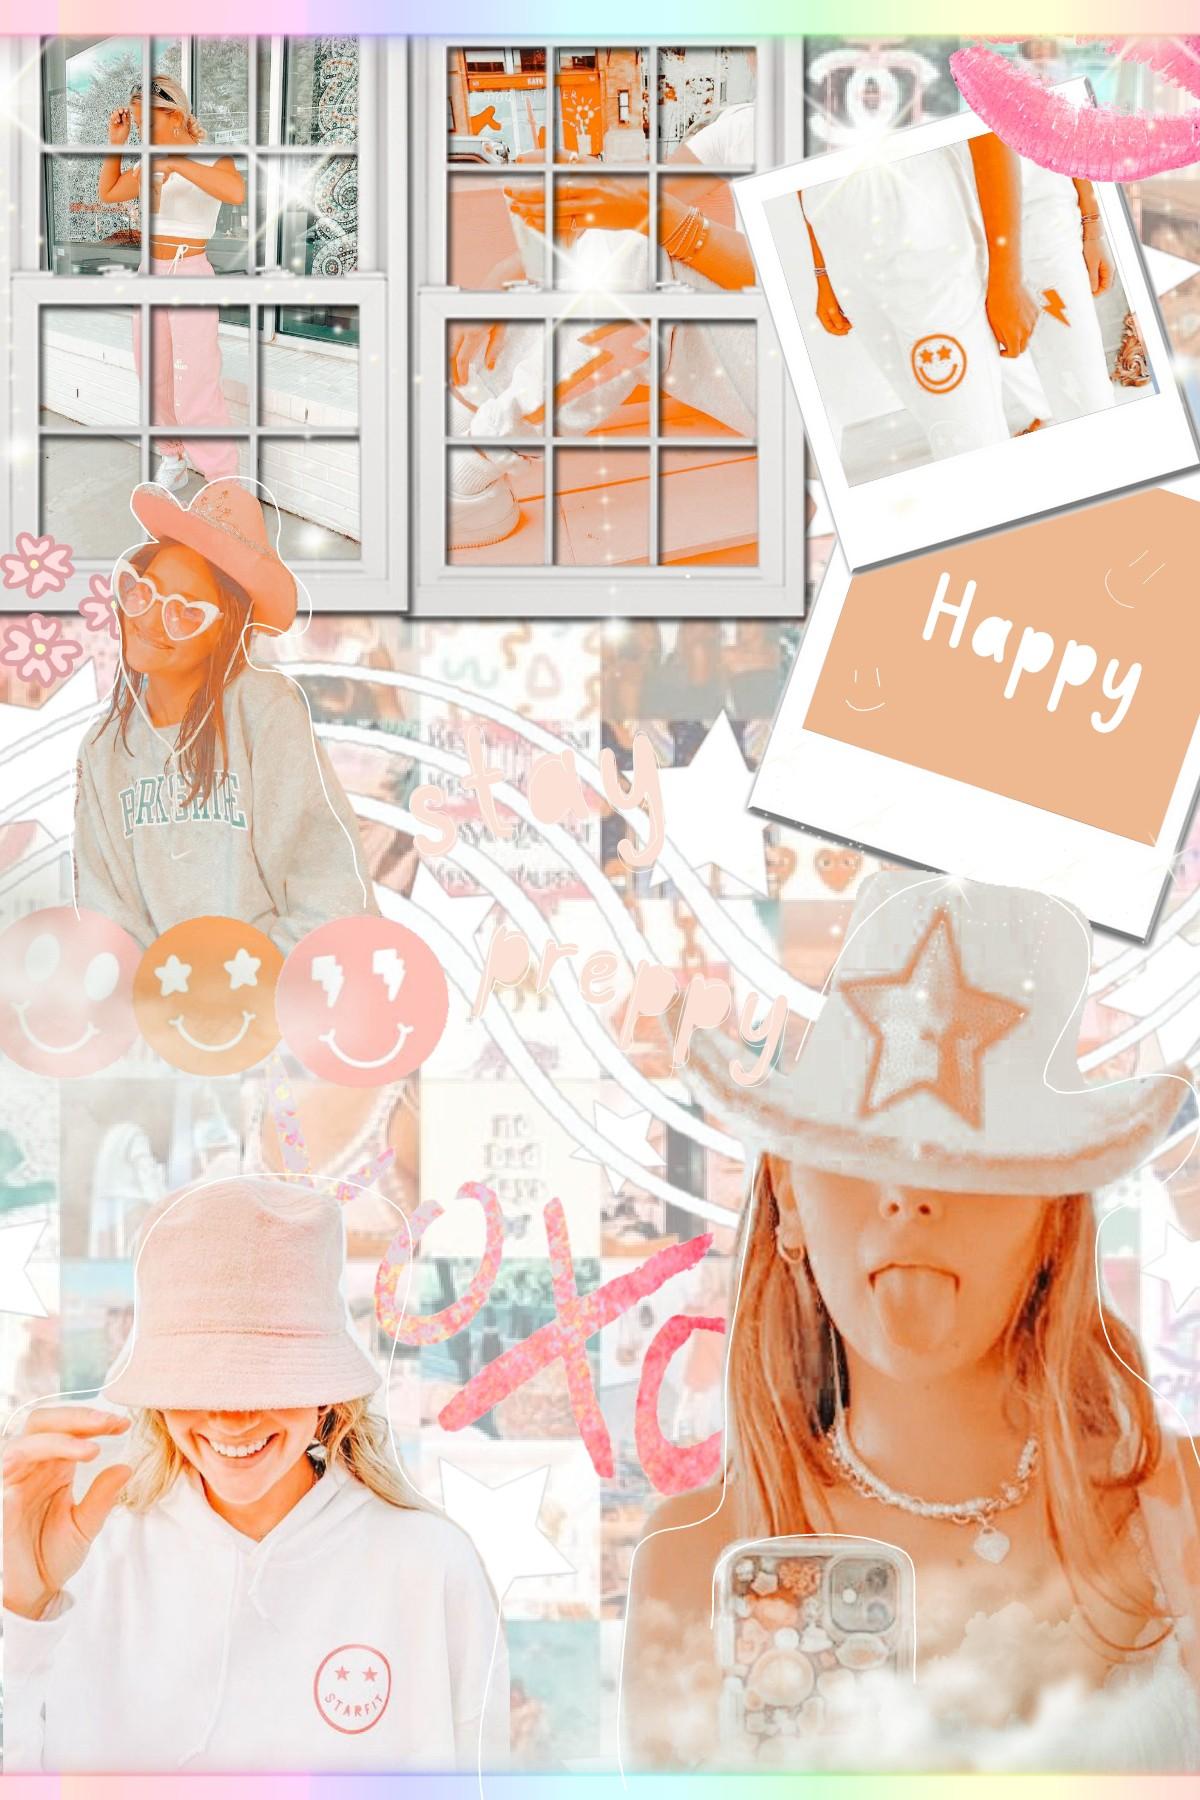 🧡Tap🧡
First preppy collage on this account! hope you like it! it's not really me but I am open minded to all styles! 
qotd: When was/is your last day of school?
aotd: June 21st 😘
